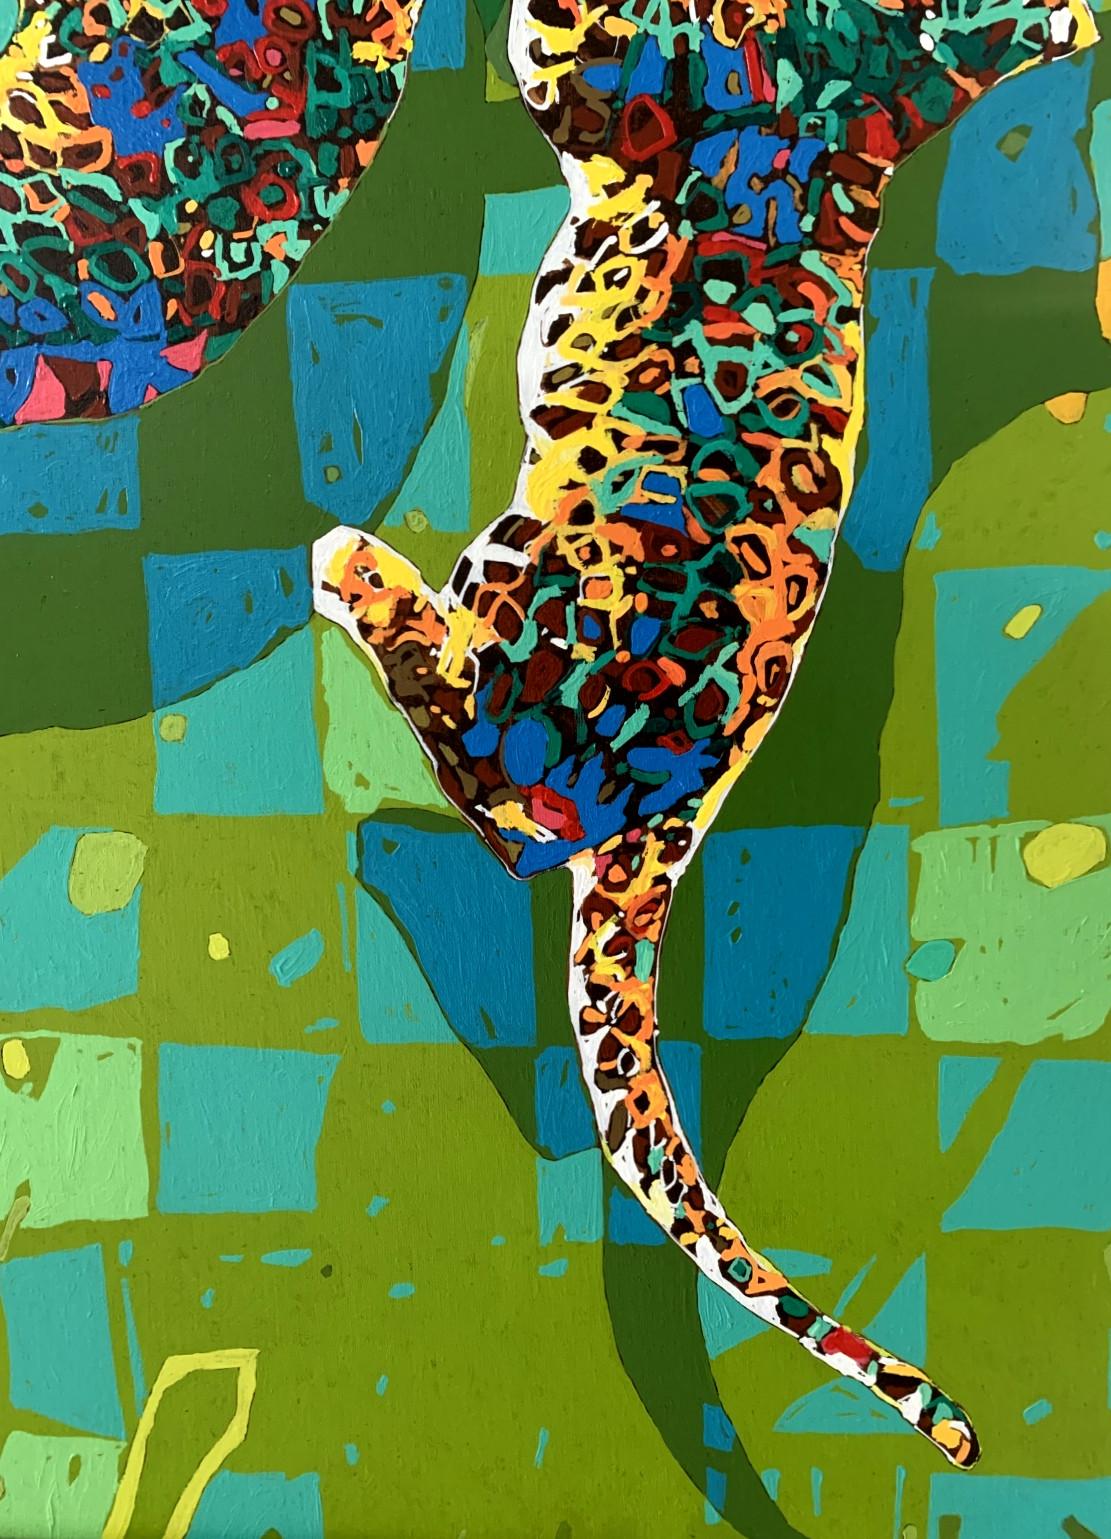 Contemporary figurtive oil on canvas painting by Polish artist Rafal Gadowski. Painting in pop art style depicting two wild cats - panthers climing onto a tree. Tha background is geometric and in mostly green and blue colors. Painting is very